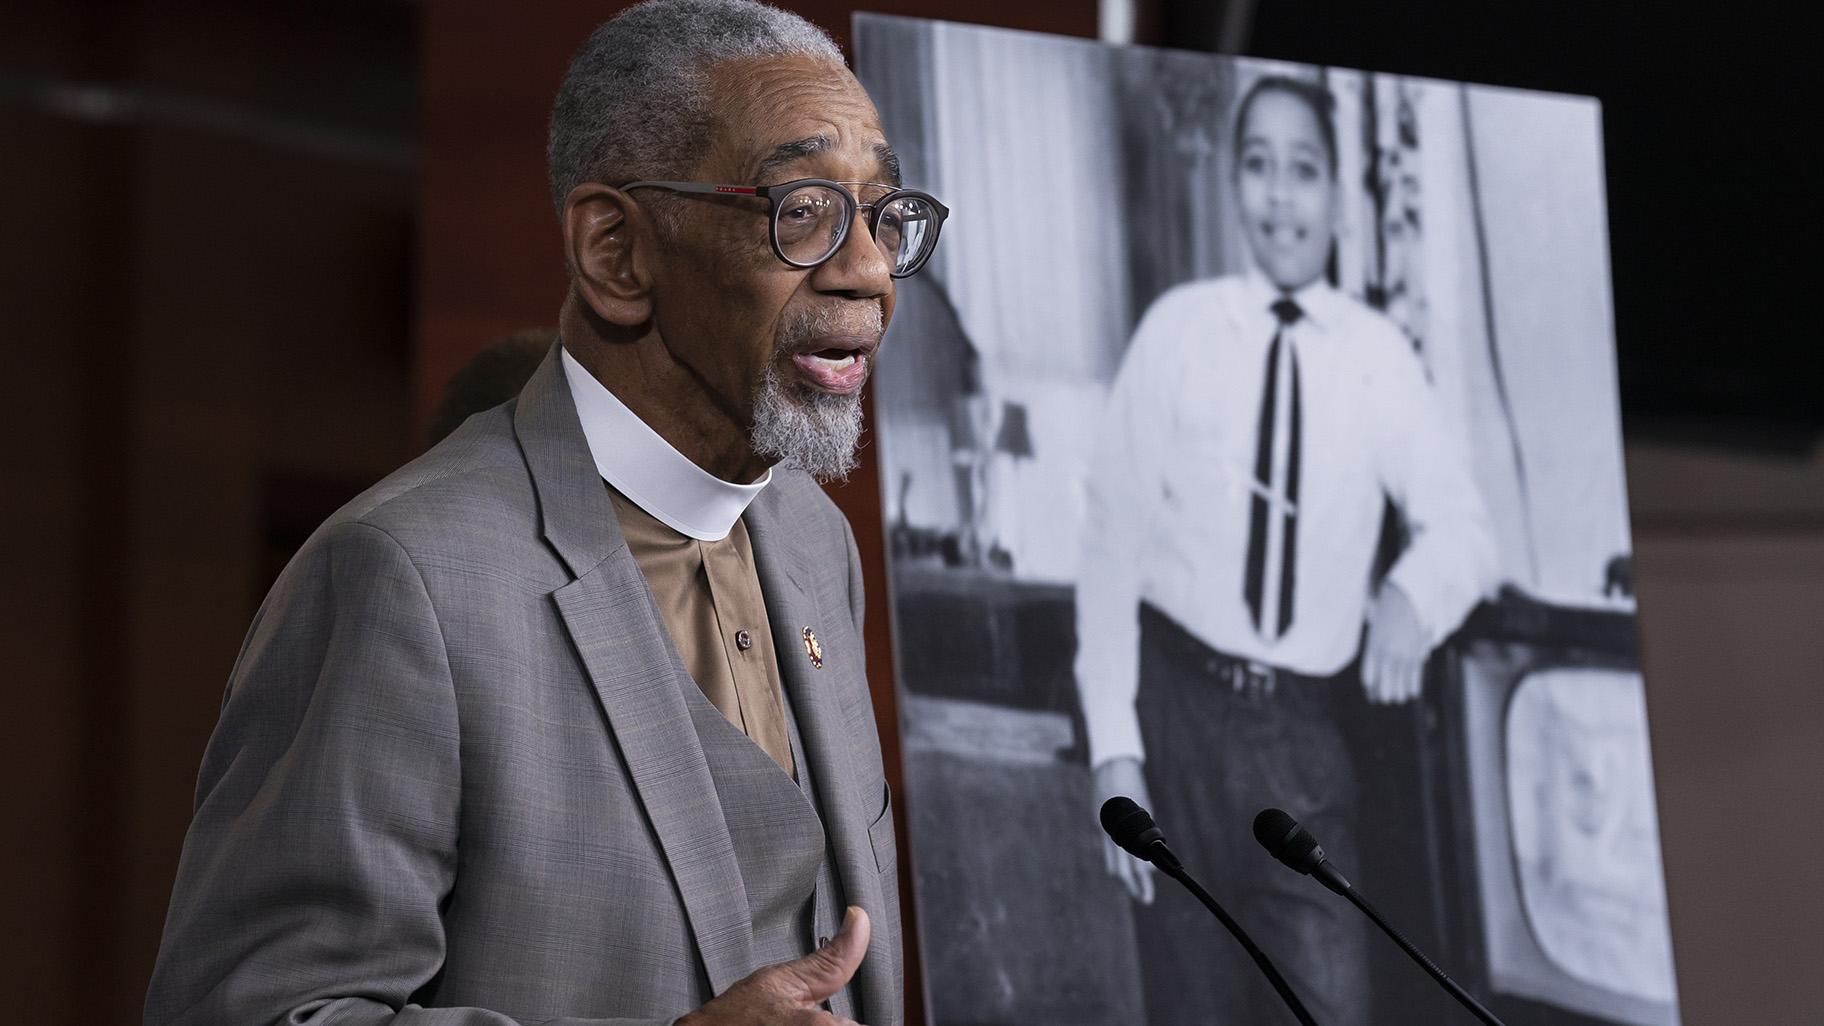 Rep. Bobby Rush, D-Ill., speaks during a news conference about the Emmett Till Anti-Lynching Act on Capitol Hill in Washington, on Feb. 26, 2020. (AP Photo / J. Scott Applewhite, File)